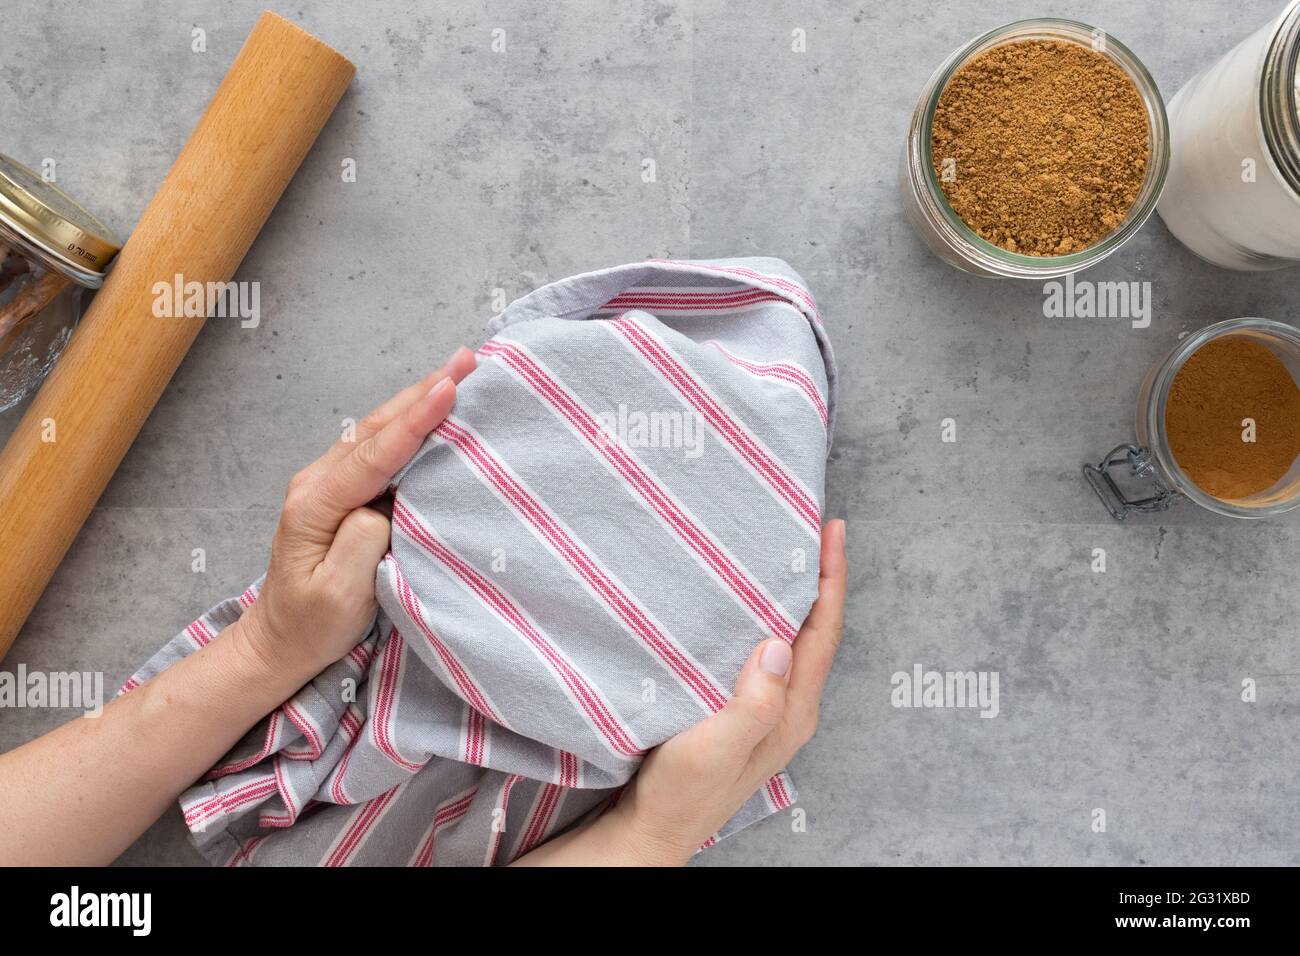 Woman hands covering some cinnamon roll dough to make it to rise. Stock Photo